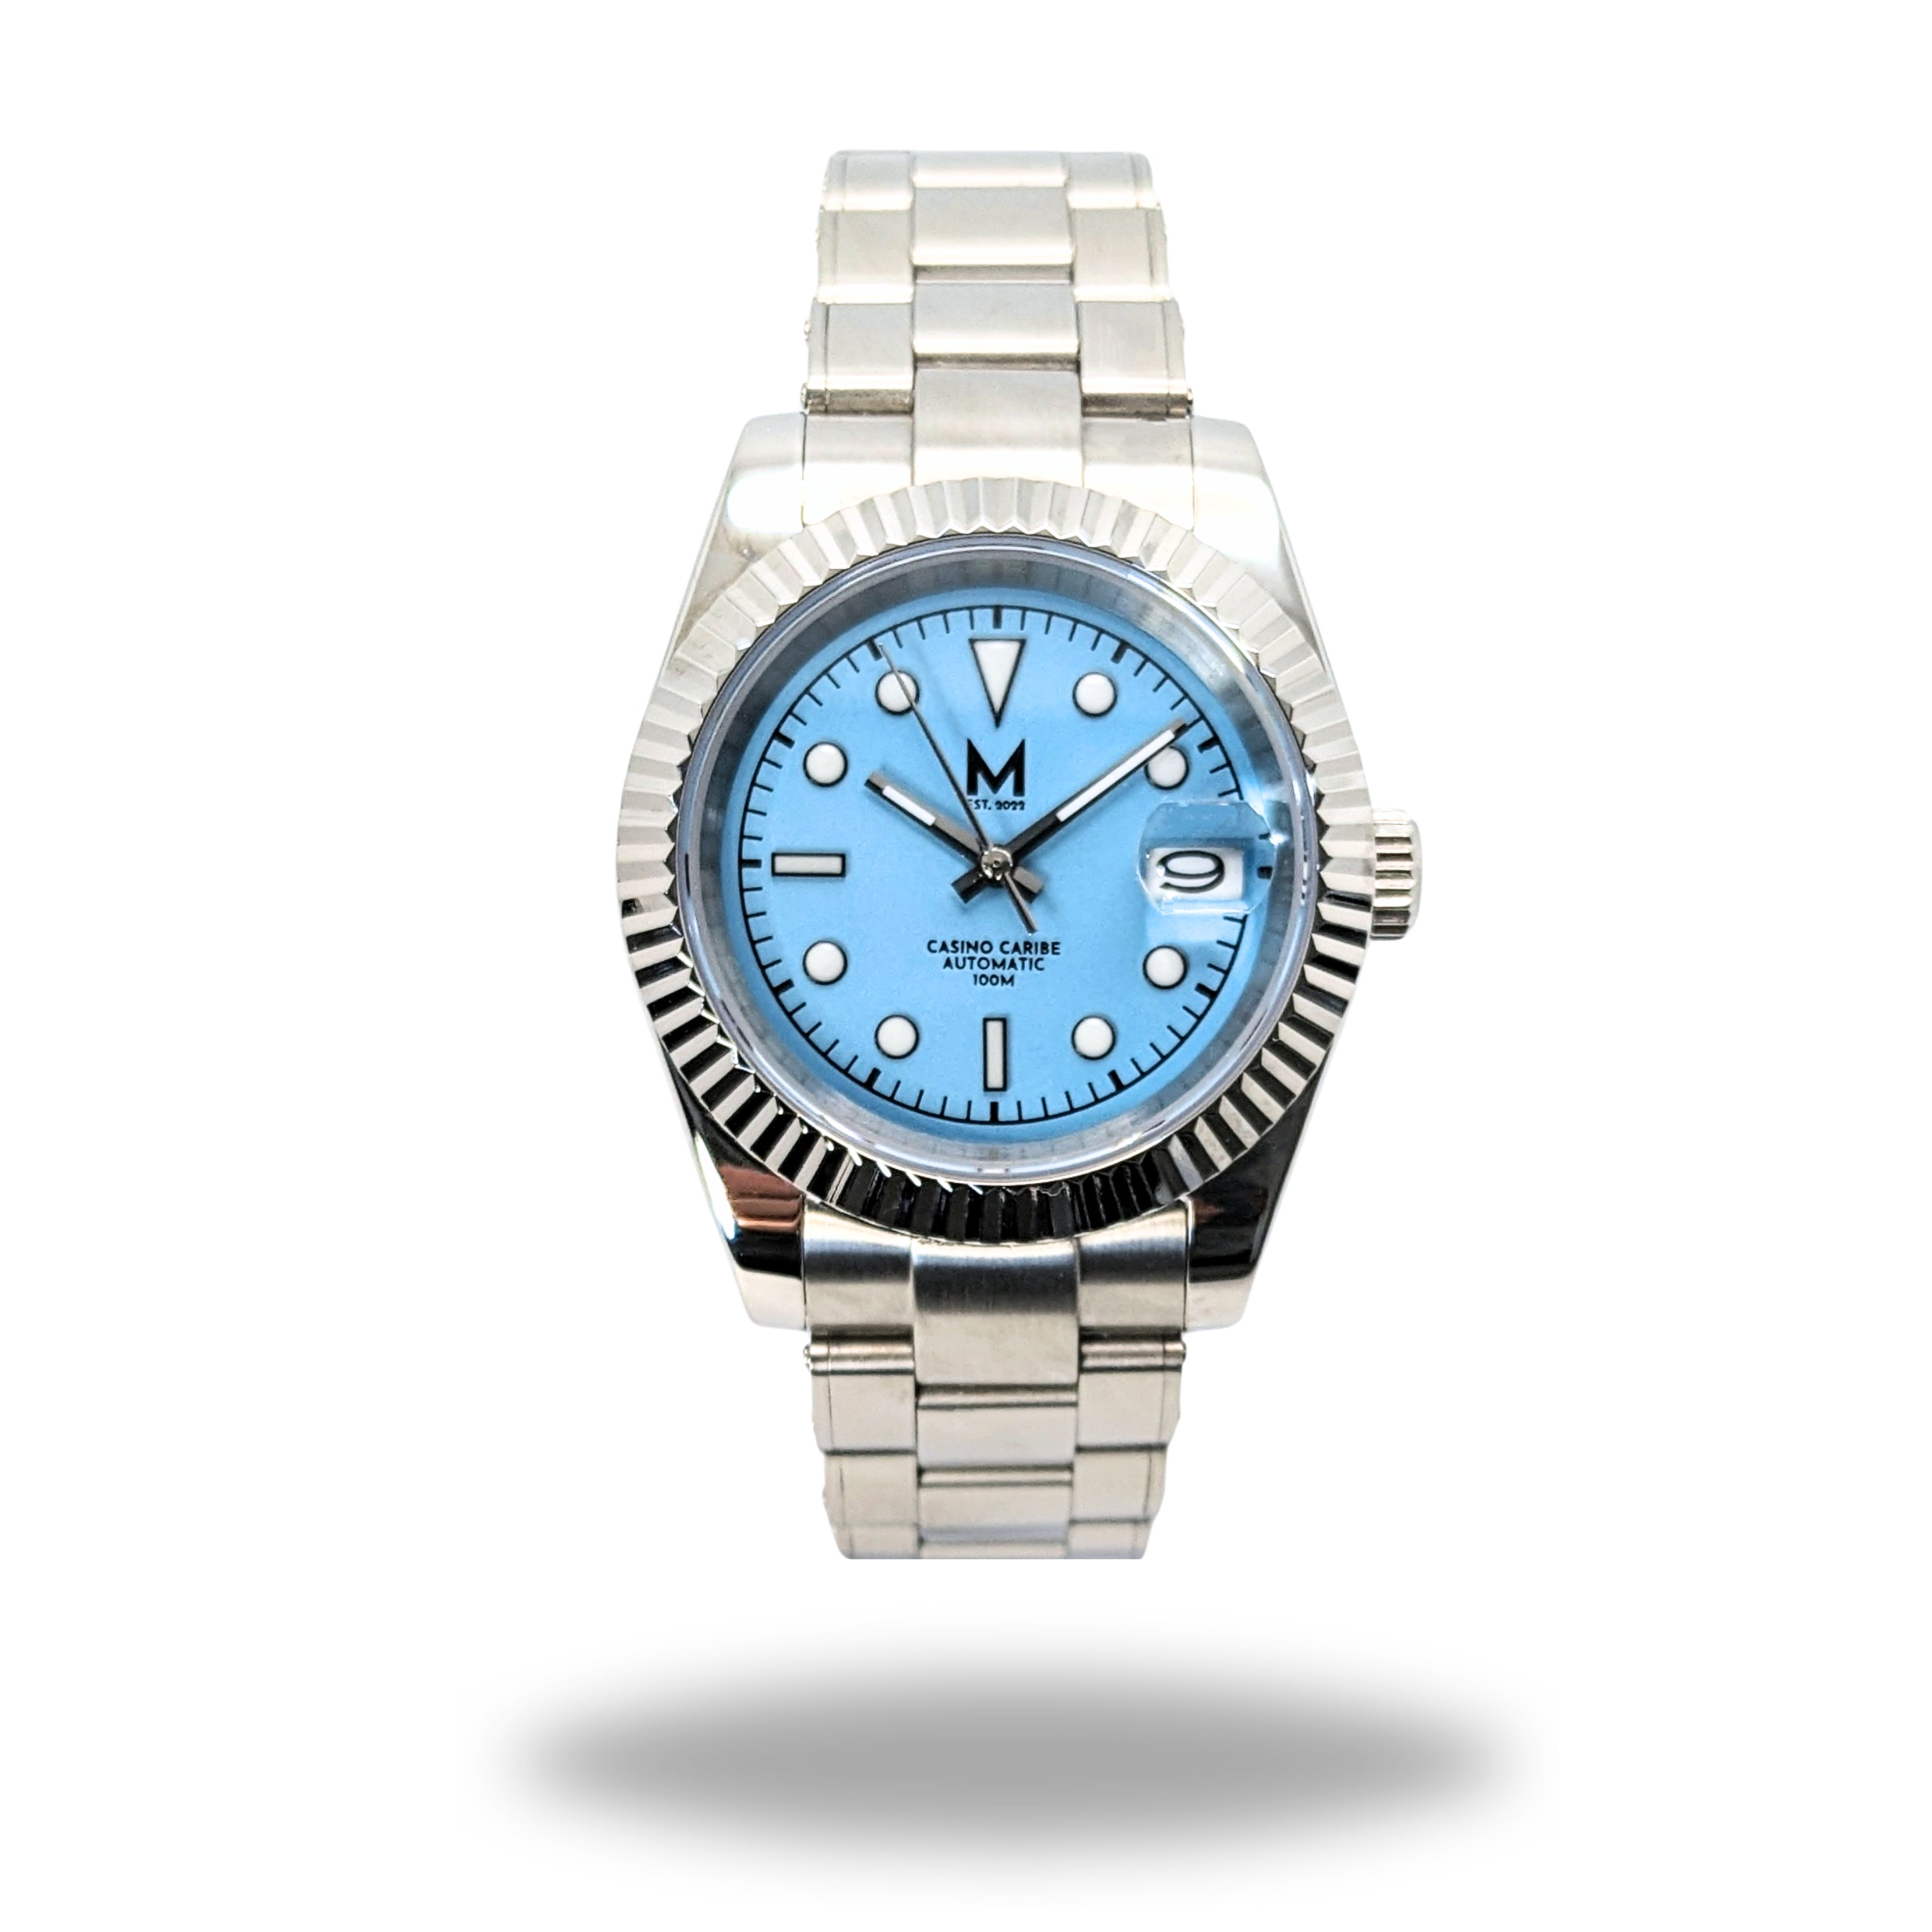 Buy NSQUARE Casino Limited Edition Round Dial Mens Watch G0369-N17.15 (M)  online